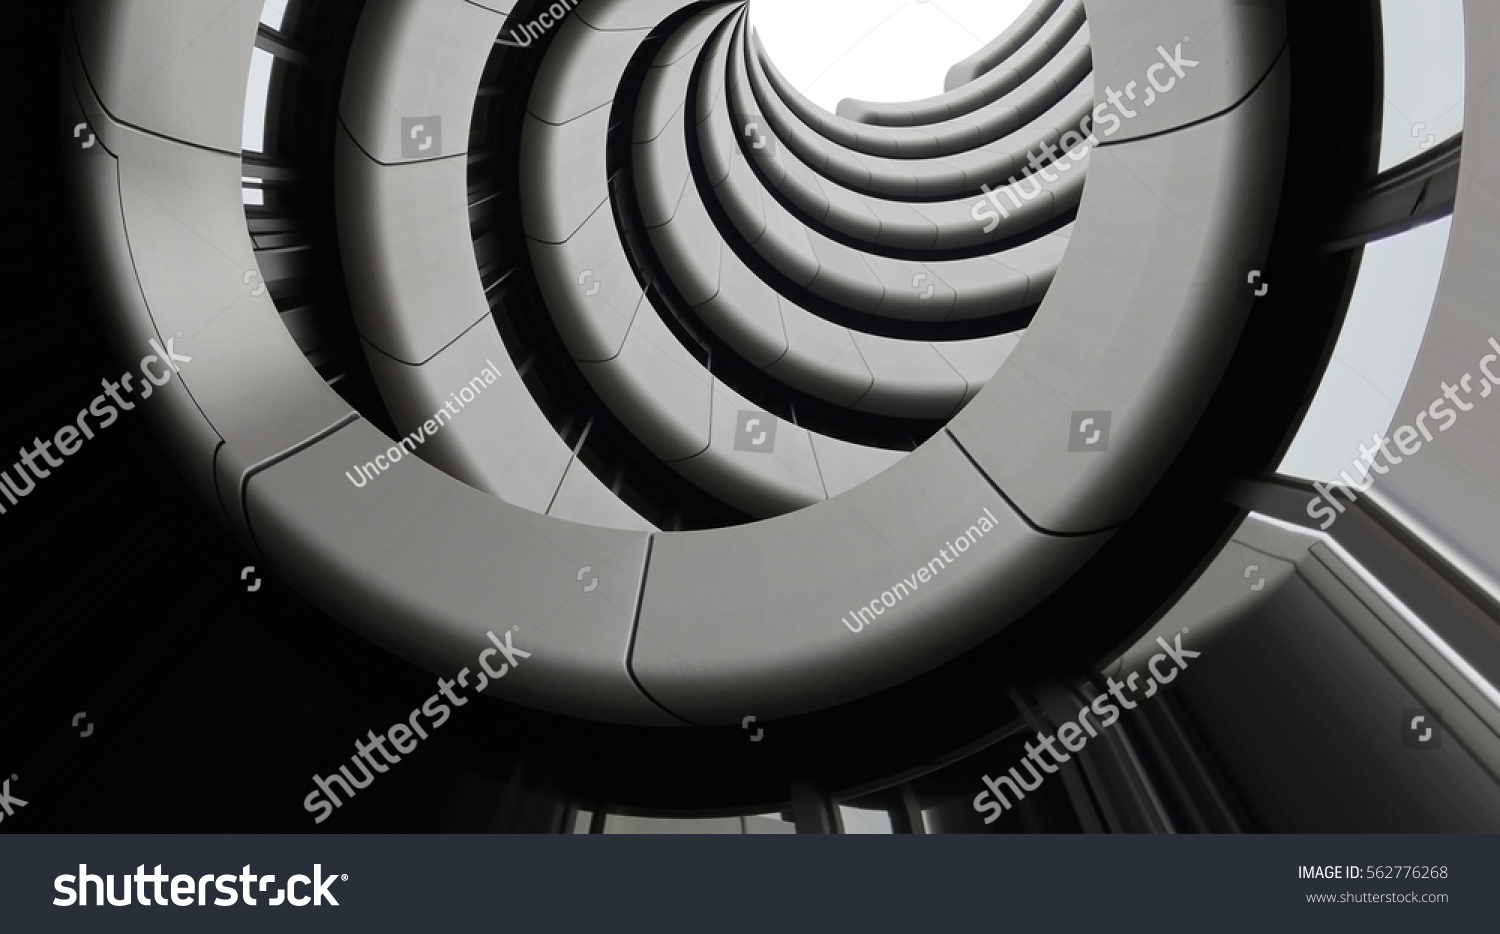 Modern architecture. Underside view of curvilinear balconies. Public or office building exterior fragment. Modular architectural structures. Industry or technology motif. #562776268